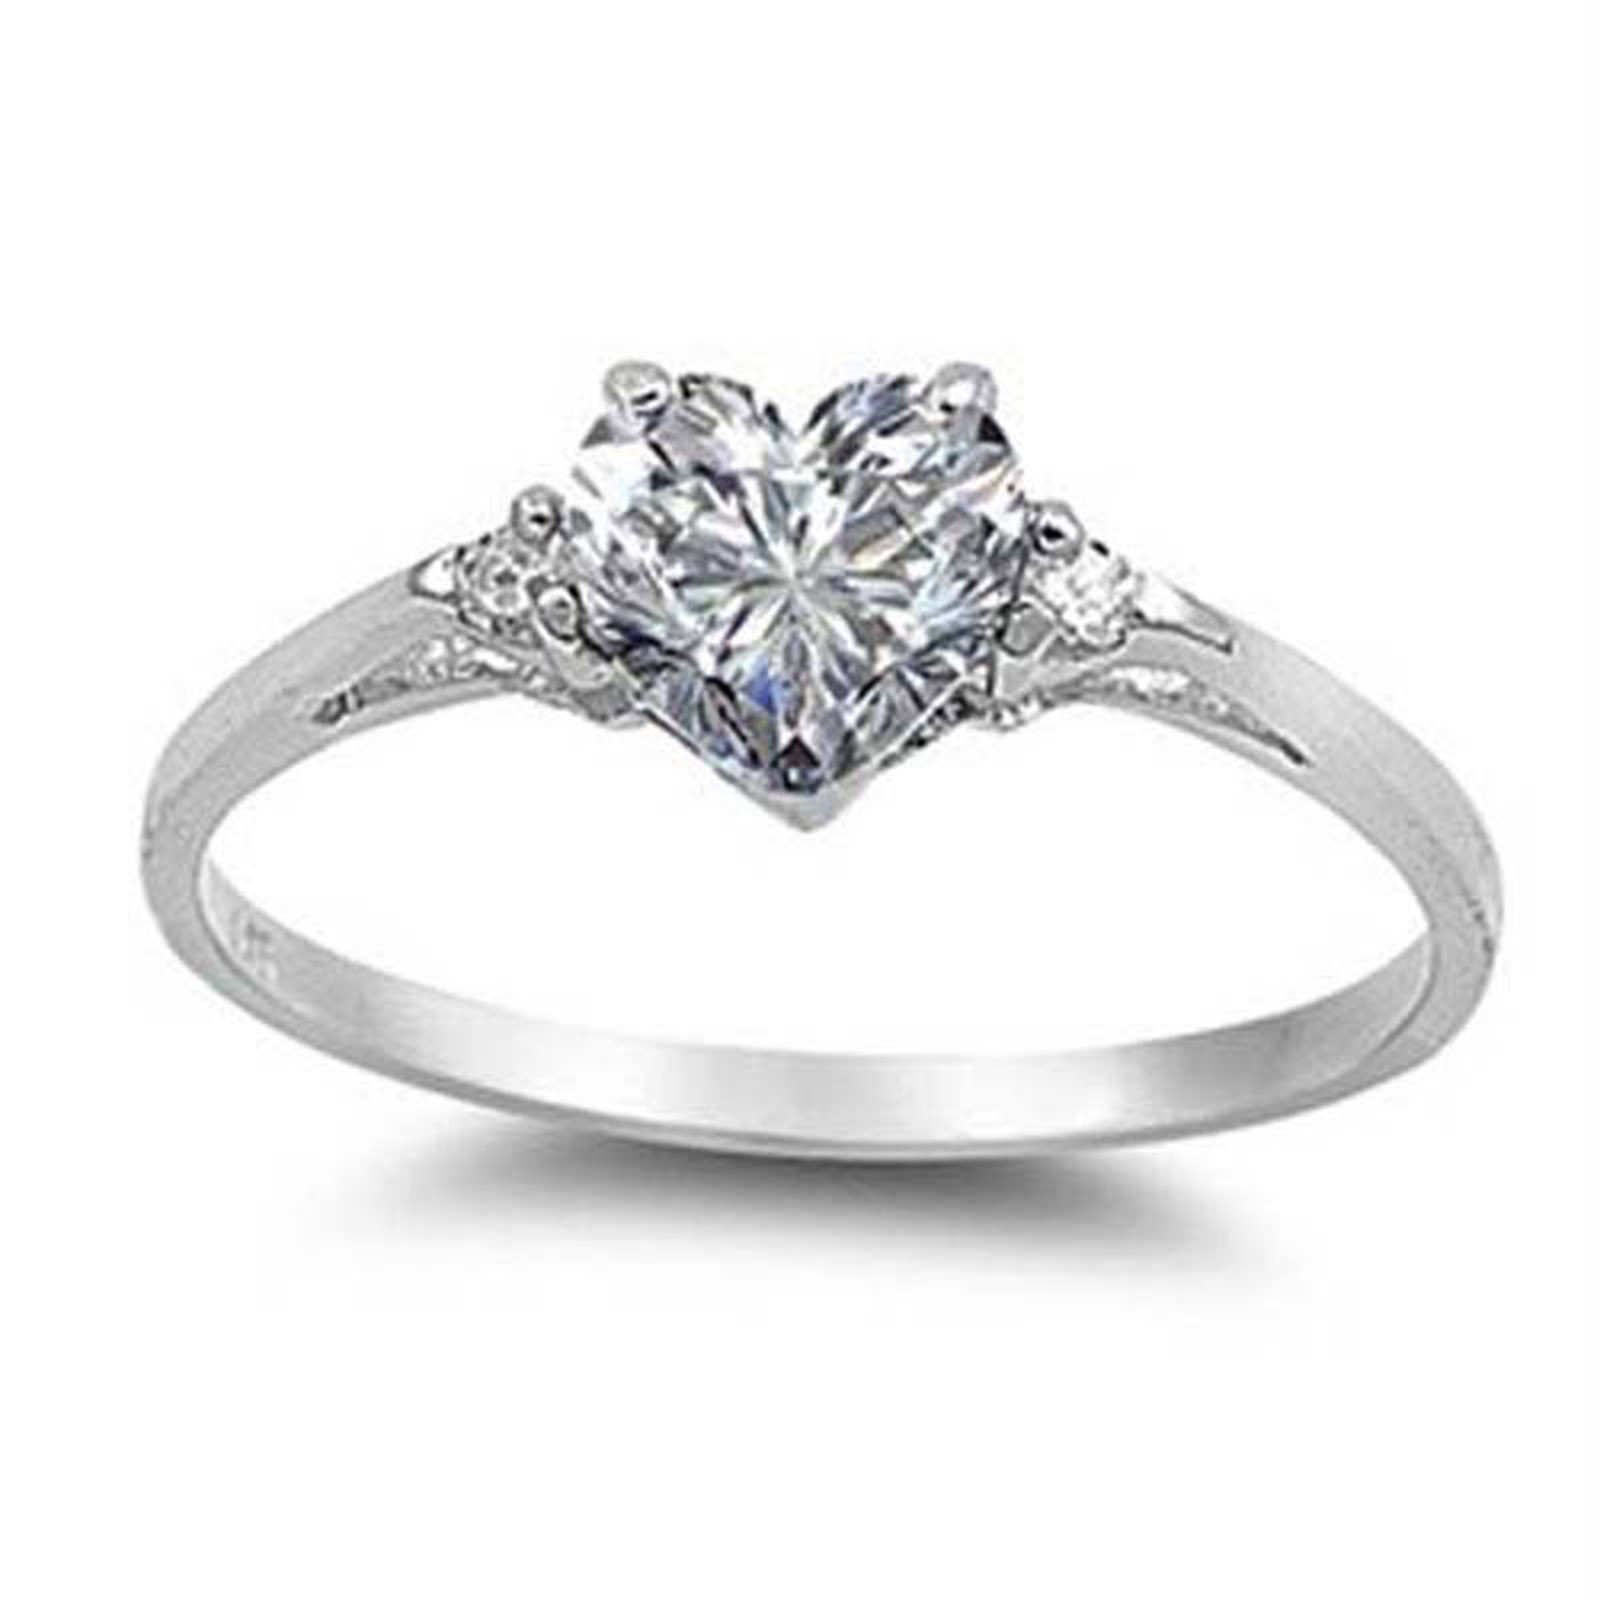 ZTTD Sterling Silver Simulated Heart Shaped Diamond Engagement Ring ...